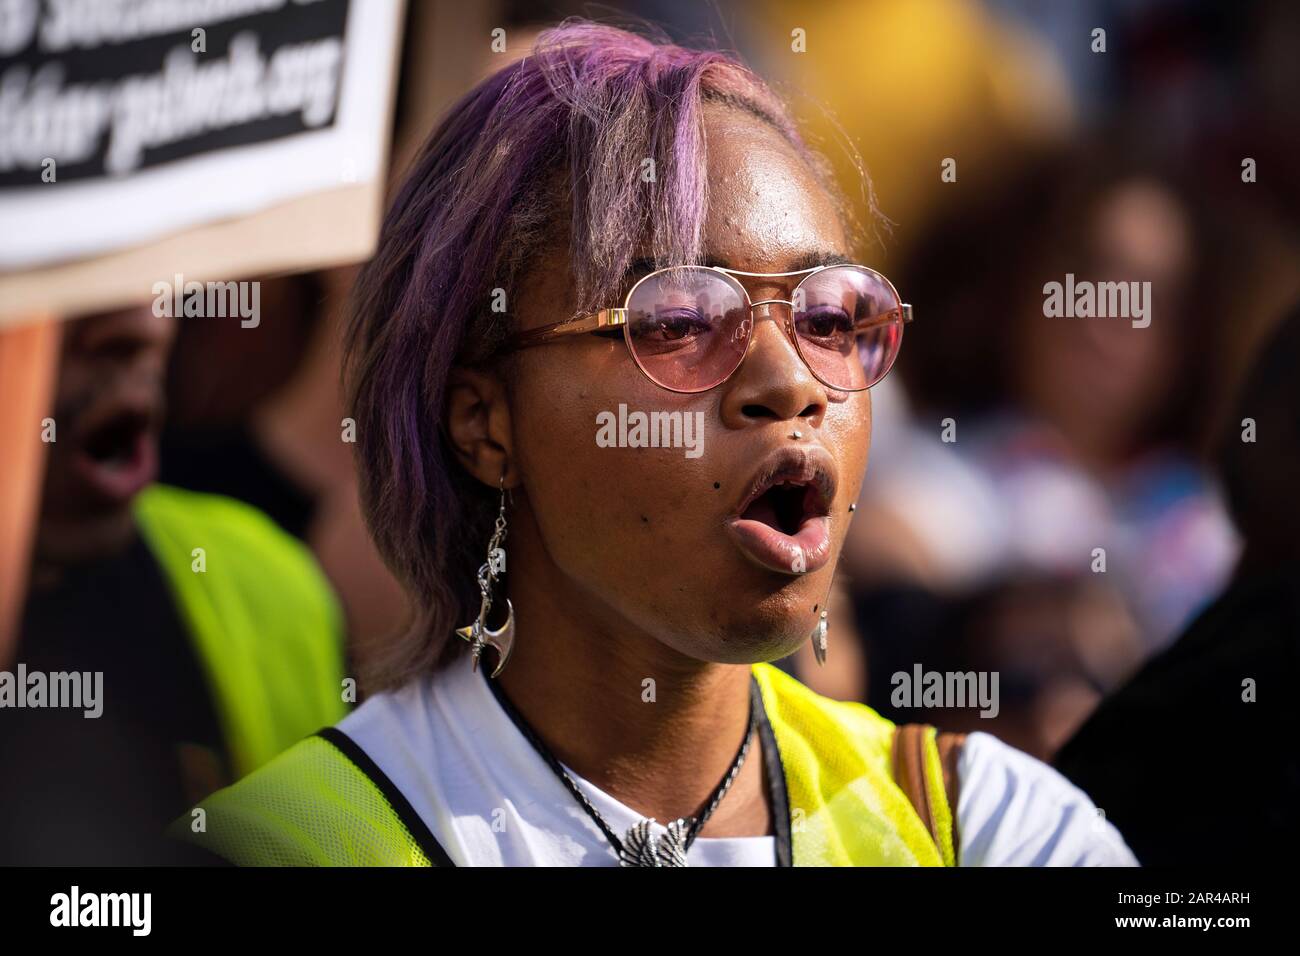 A protester chants slogans during the demonstration.No War in Iran protest against the Trump Administration’s military actions and economic sanctions against Iran. Organizers called on Trump to withdraw U.S. troops from Iraq and not to drag the U.S. into a war in the Middle East. Stock Photo